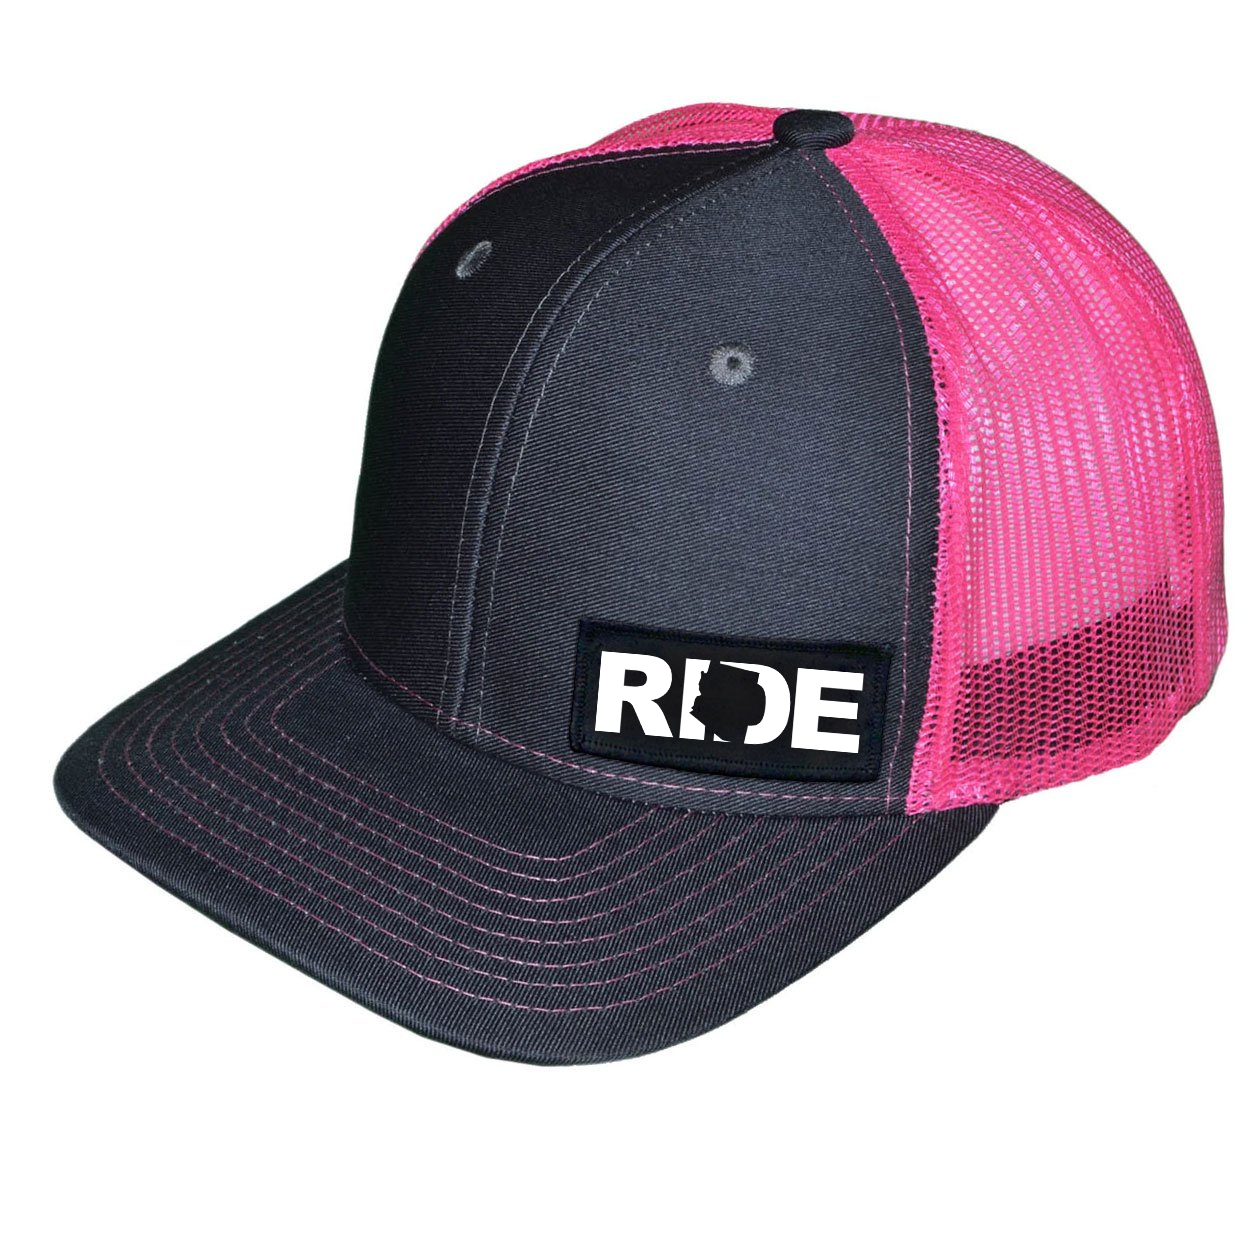 Ride Arizona Night Out Woven Patch Snapback Trucker Hat Charcoal/Neon Pink (White Logo)